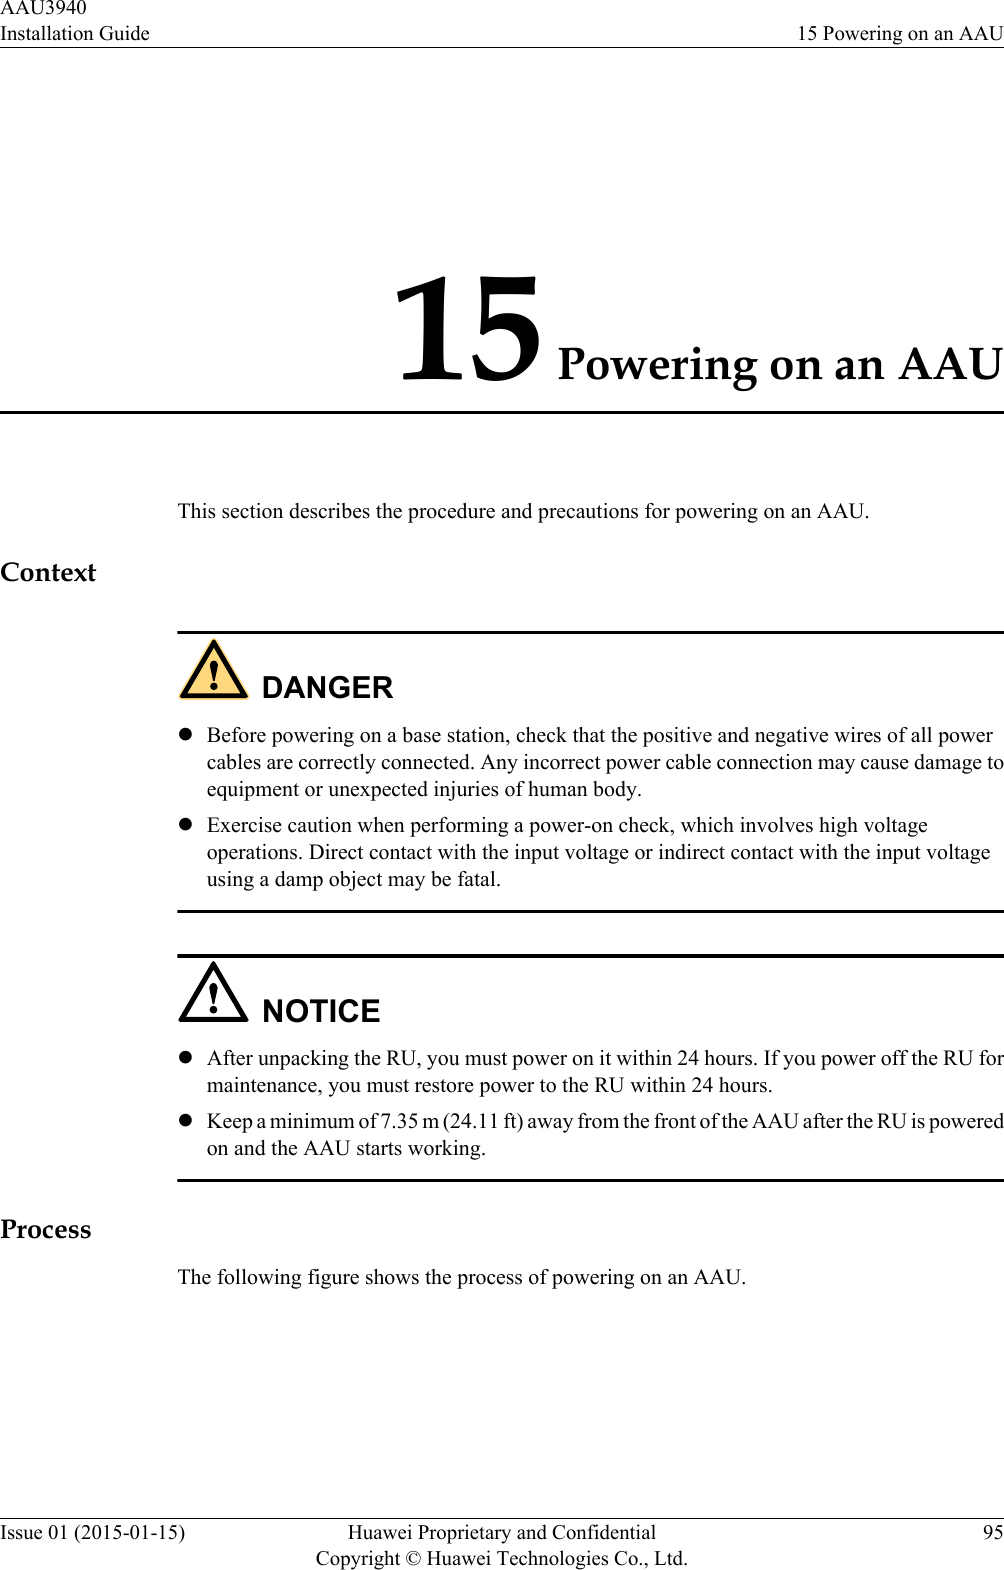 15 Powering on an AAUThis section describes the procedure and precautions for powering on an AAU.ContextDANGERlBefore powering on a base station, check that the positive and negative wires of all powercables are correctly connected. Any incorrect power cable connection may cause damage toequipment or unexpected injuries of human body.lExercise caution when performing a power-on check, which involves high voltageoperations. Direct contact with the input voltage or indirect contact with the input voltageusing a damp object may be fatal.NOTICElAfter unpacking the RU, you must power on it within 24 hours. If you power off the RU formaintenance, you must restore power to the RU within 24 hours.lKeep a minimum of 7.35 m (24.11 ft) away from the front of the AAU after the RU is poweredon and the AAU starts working.ProcessThe following figure shows the process of powering on an AAU.AAU3940Installation Guide 15 Powering on an AAUIssue 01 (2015-01-15) Huawei Proprietary and ConfidentialCopyright © Huawei Technologies Co., Ltd.95